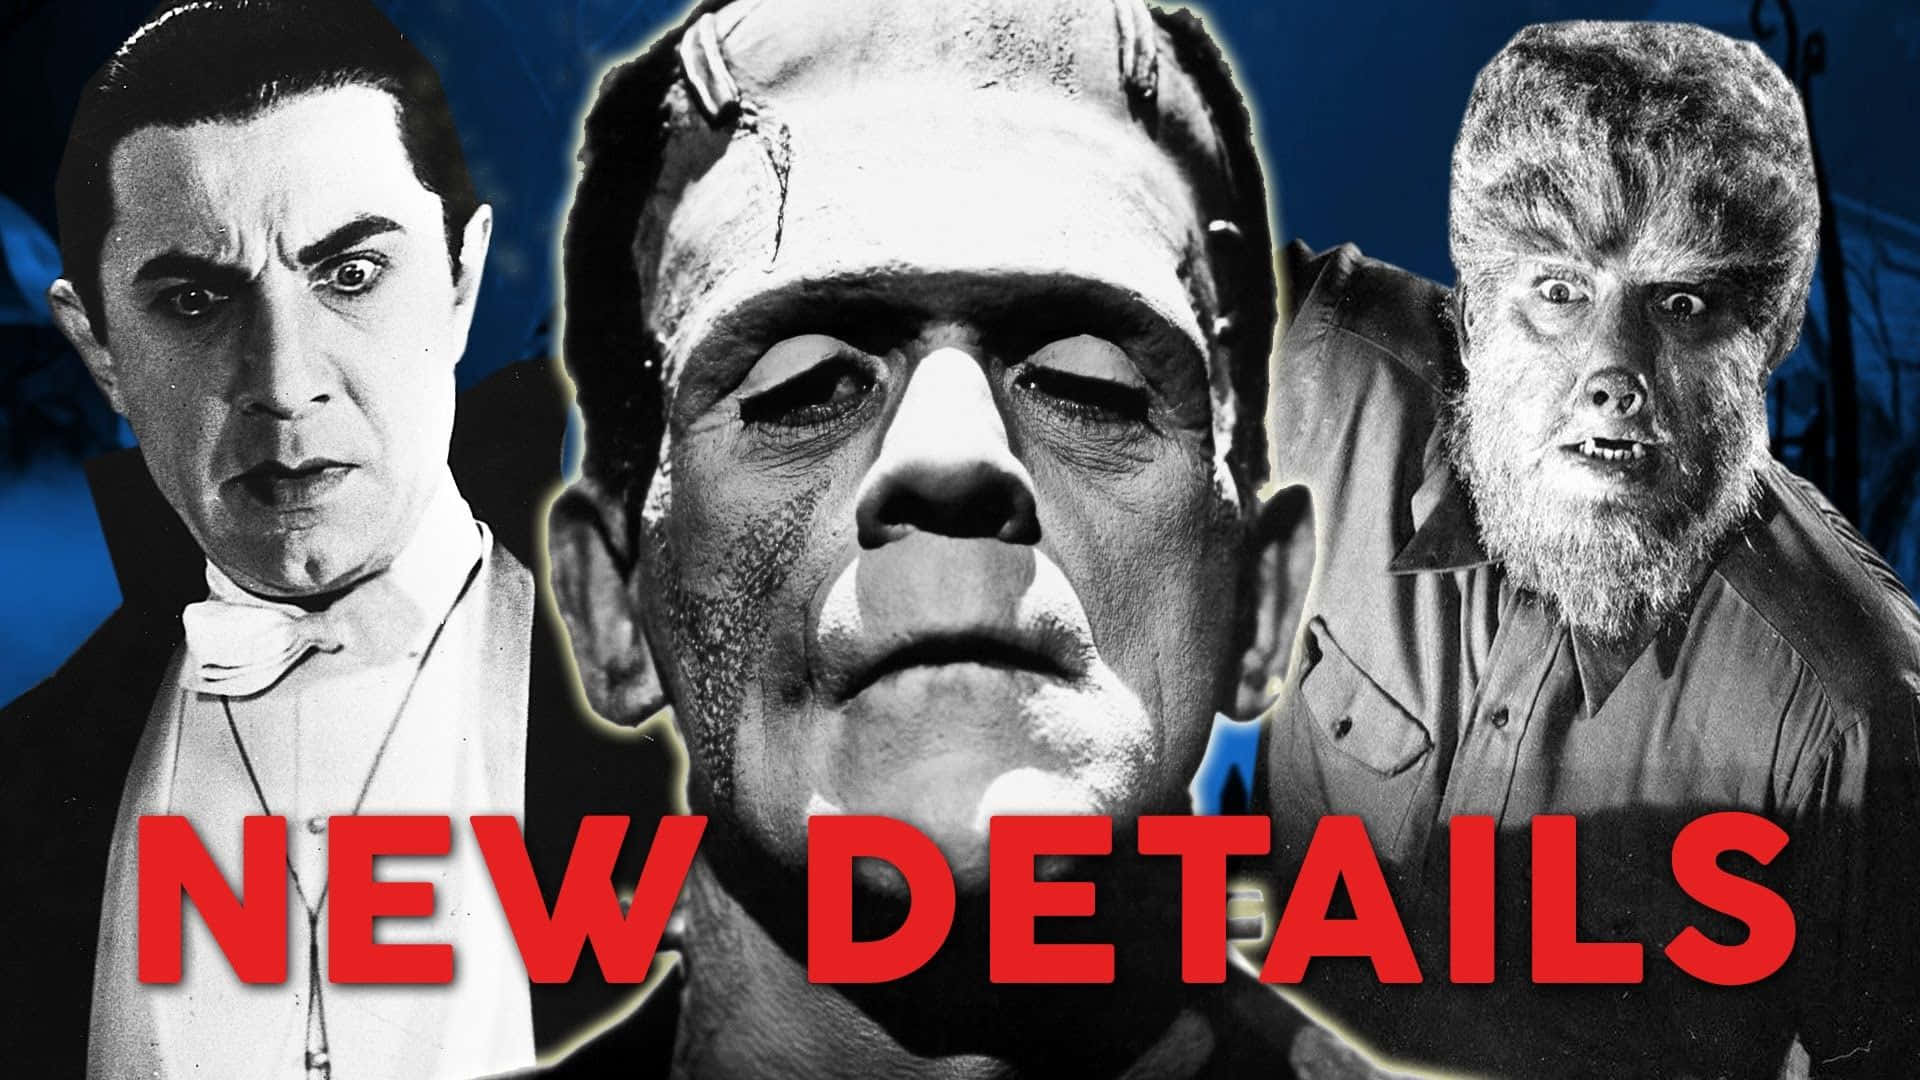 Follow in the footsteps of the Universal Monsters Wallpaper